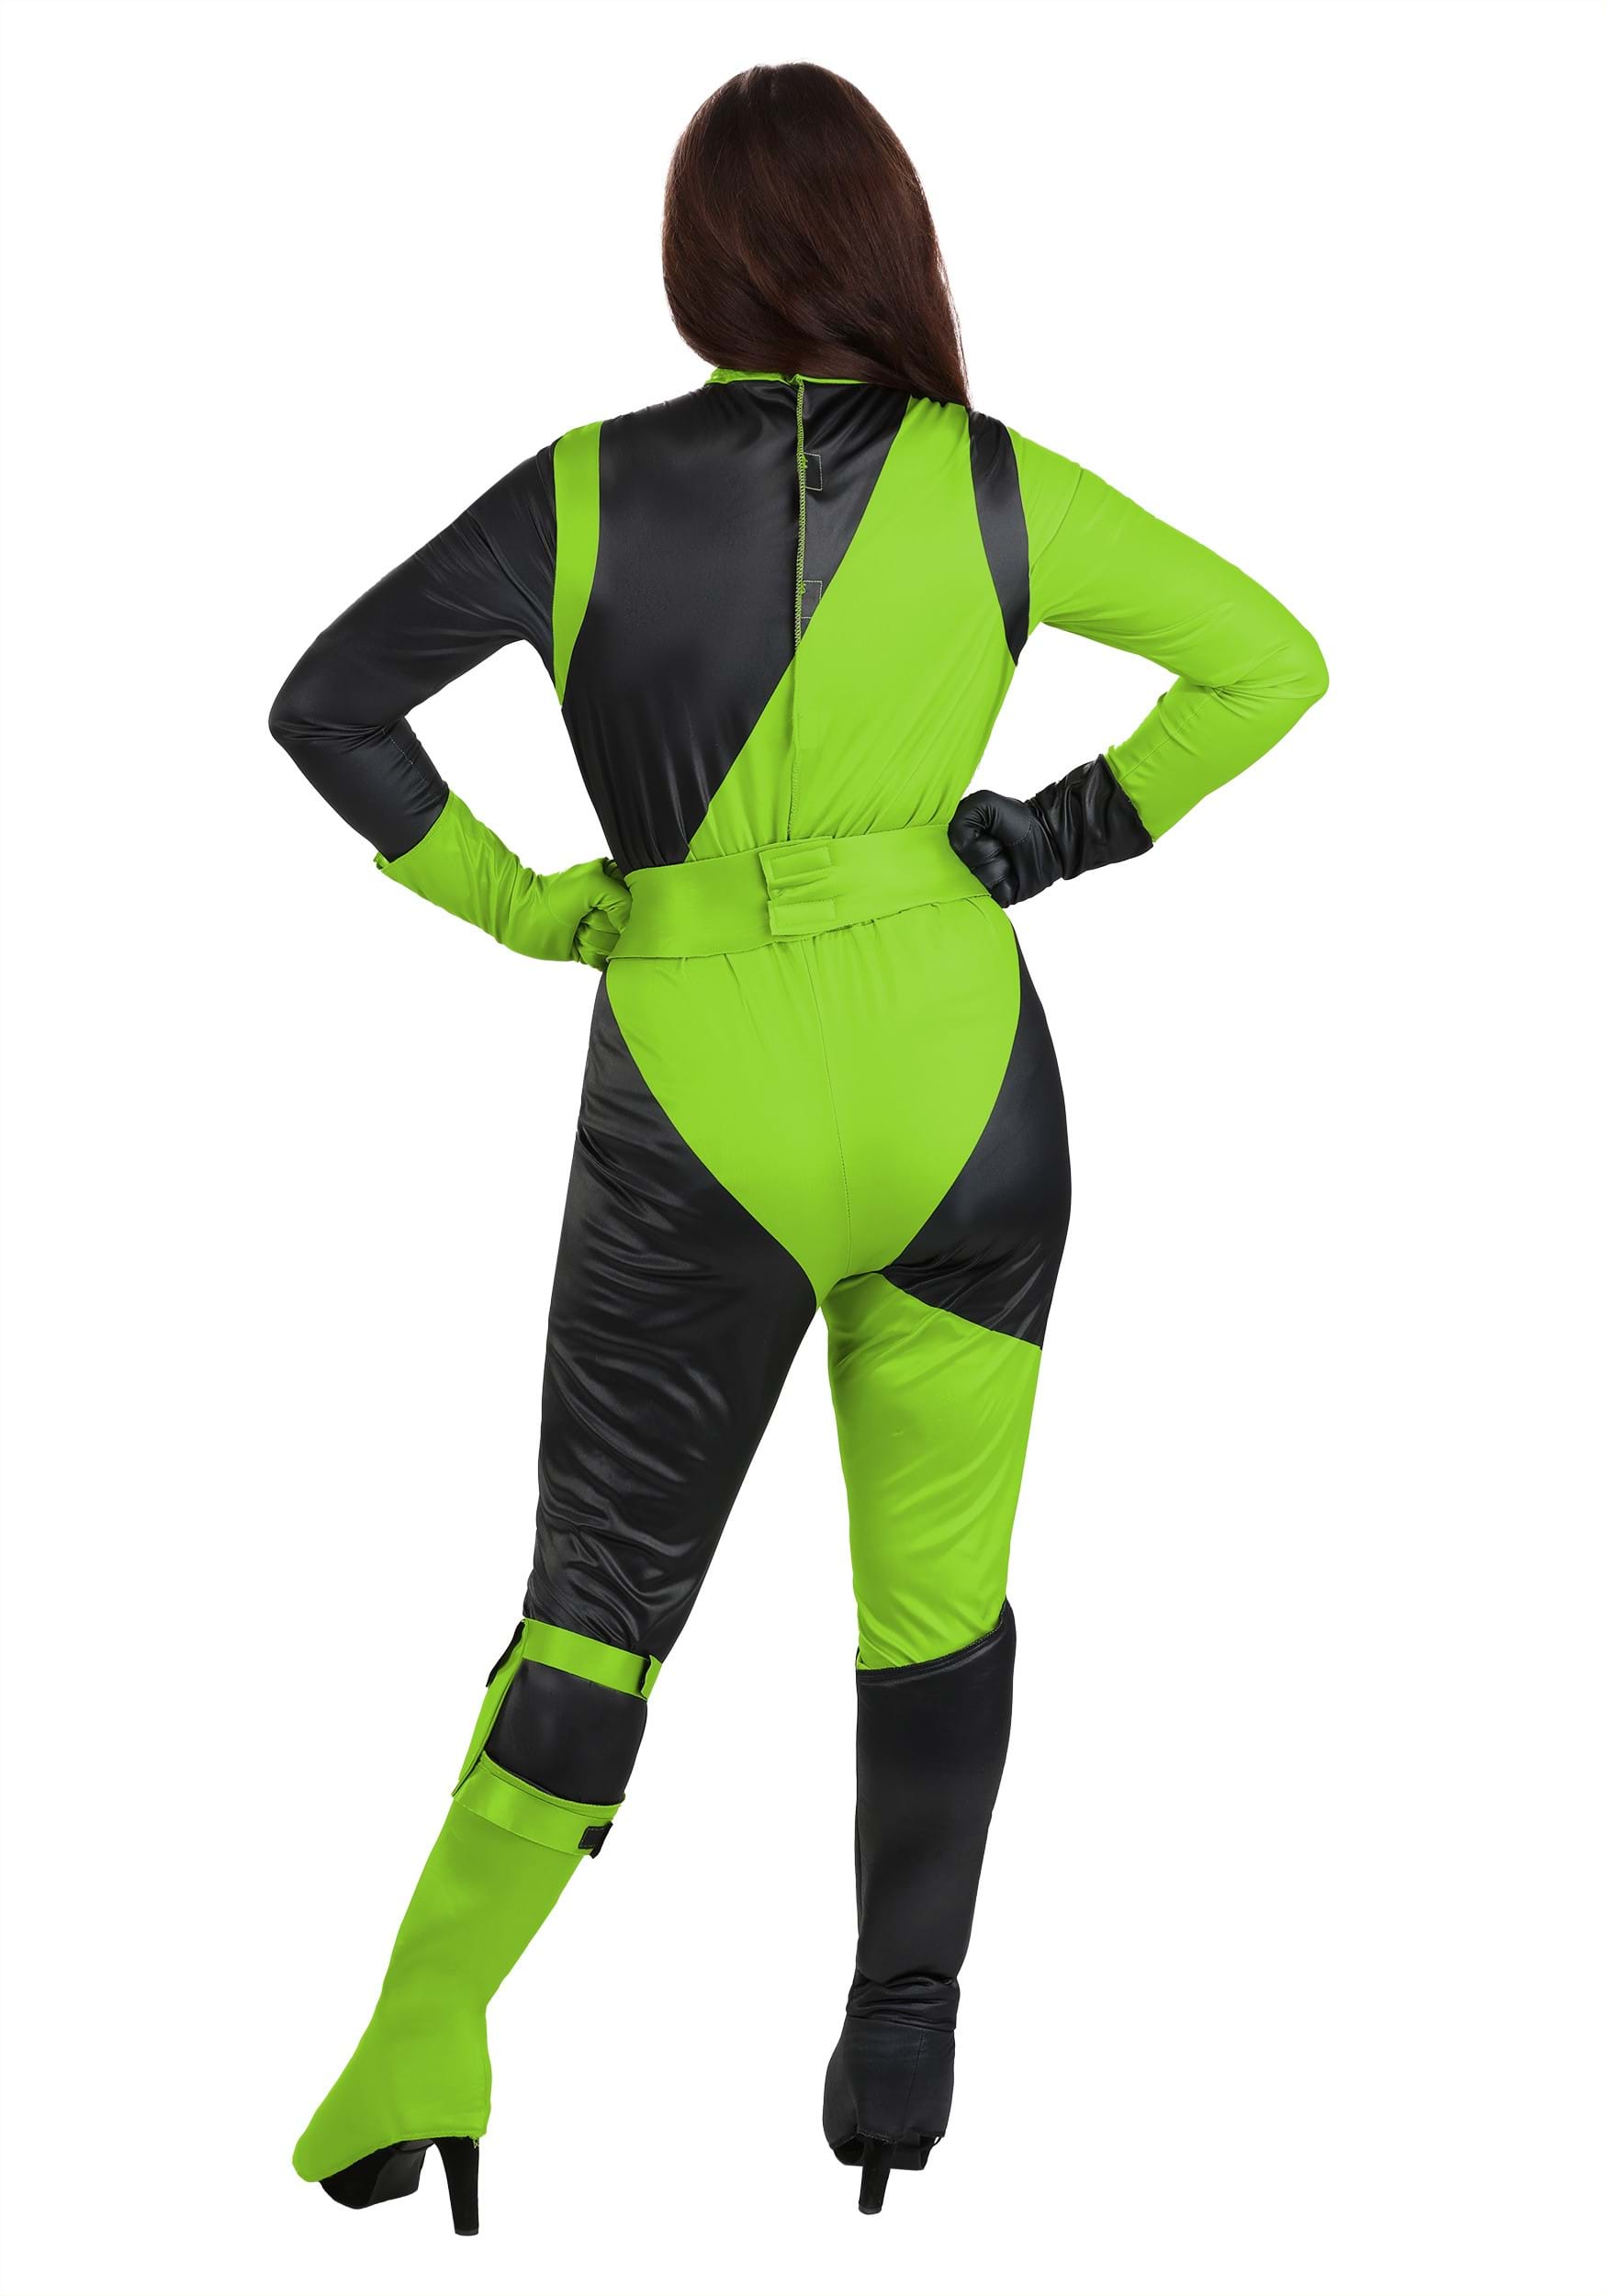 Kim Possible Animated Series Shego Fancy Dress Costume For Women